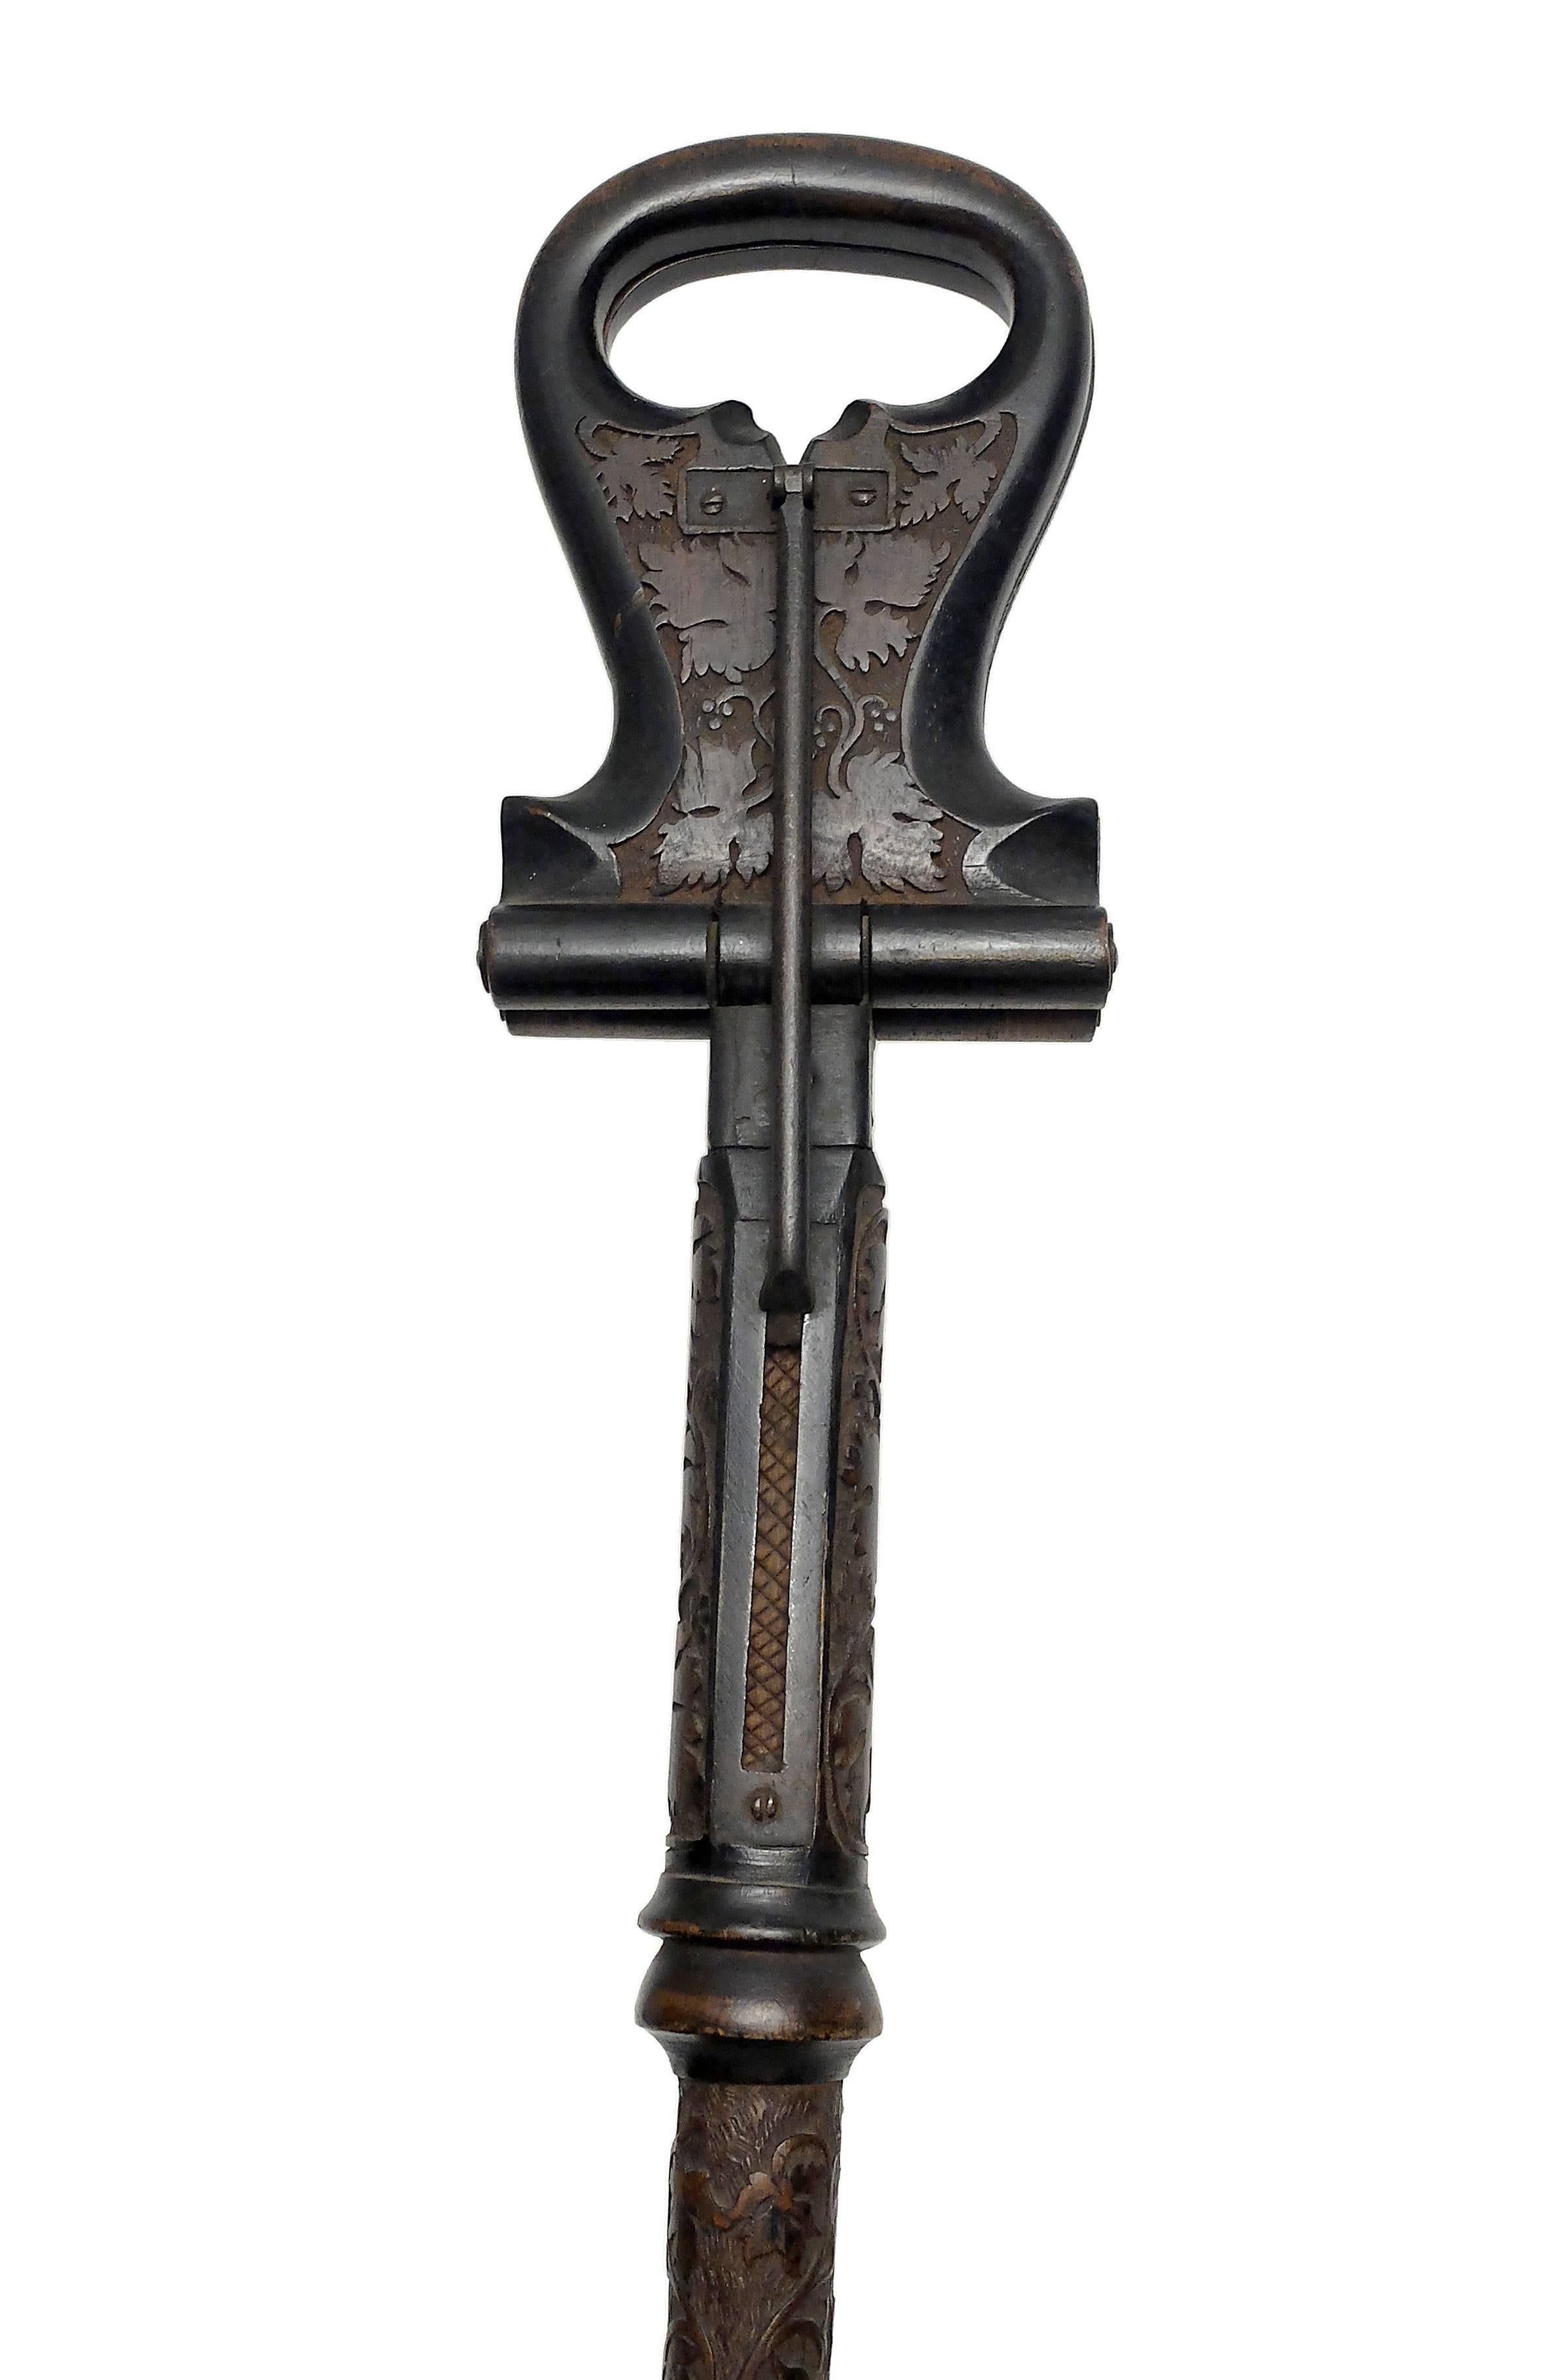 This cane is an unusually and richly decorated sample of the famous seat gadget cane. Tall iron ferrule with a wide disk to stop and secure it when plugged into the grass, the shaft and the openable handle are entirely engraved in low relief with a